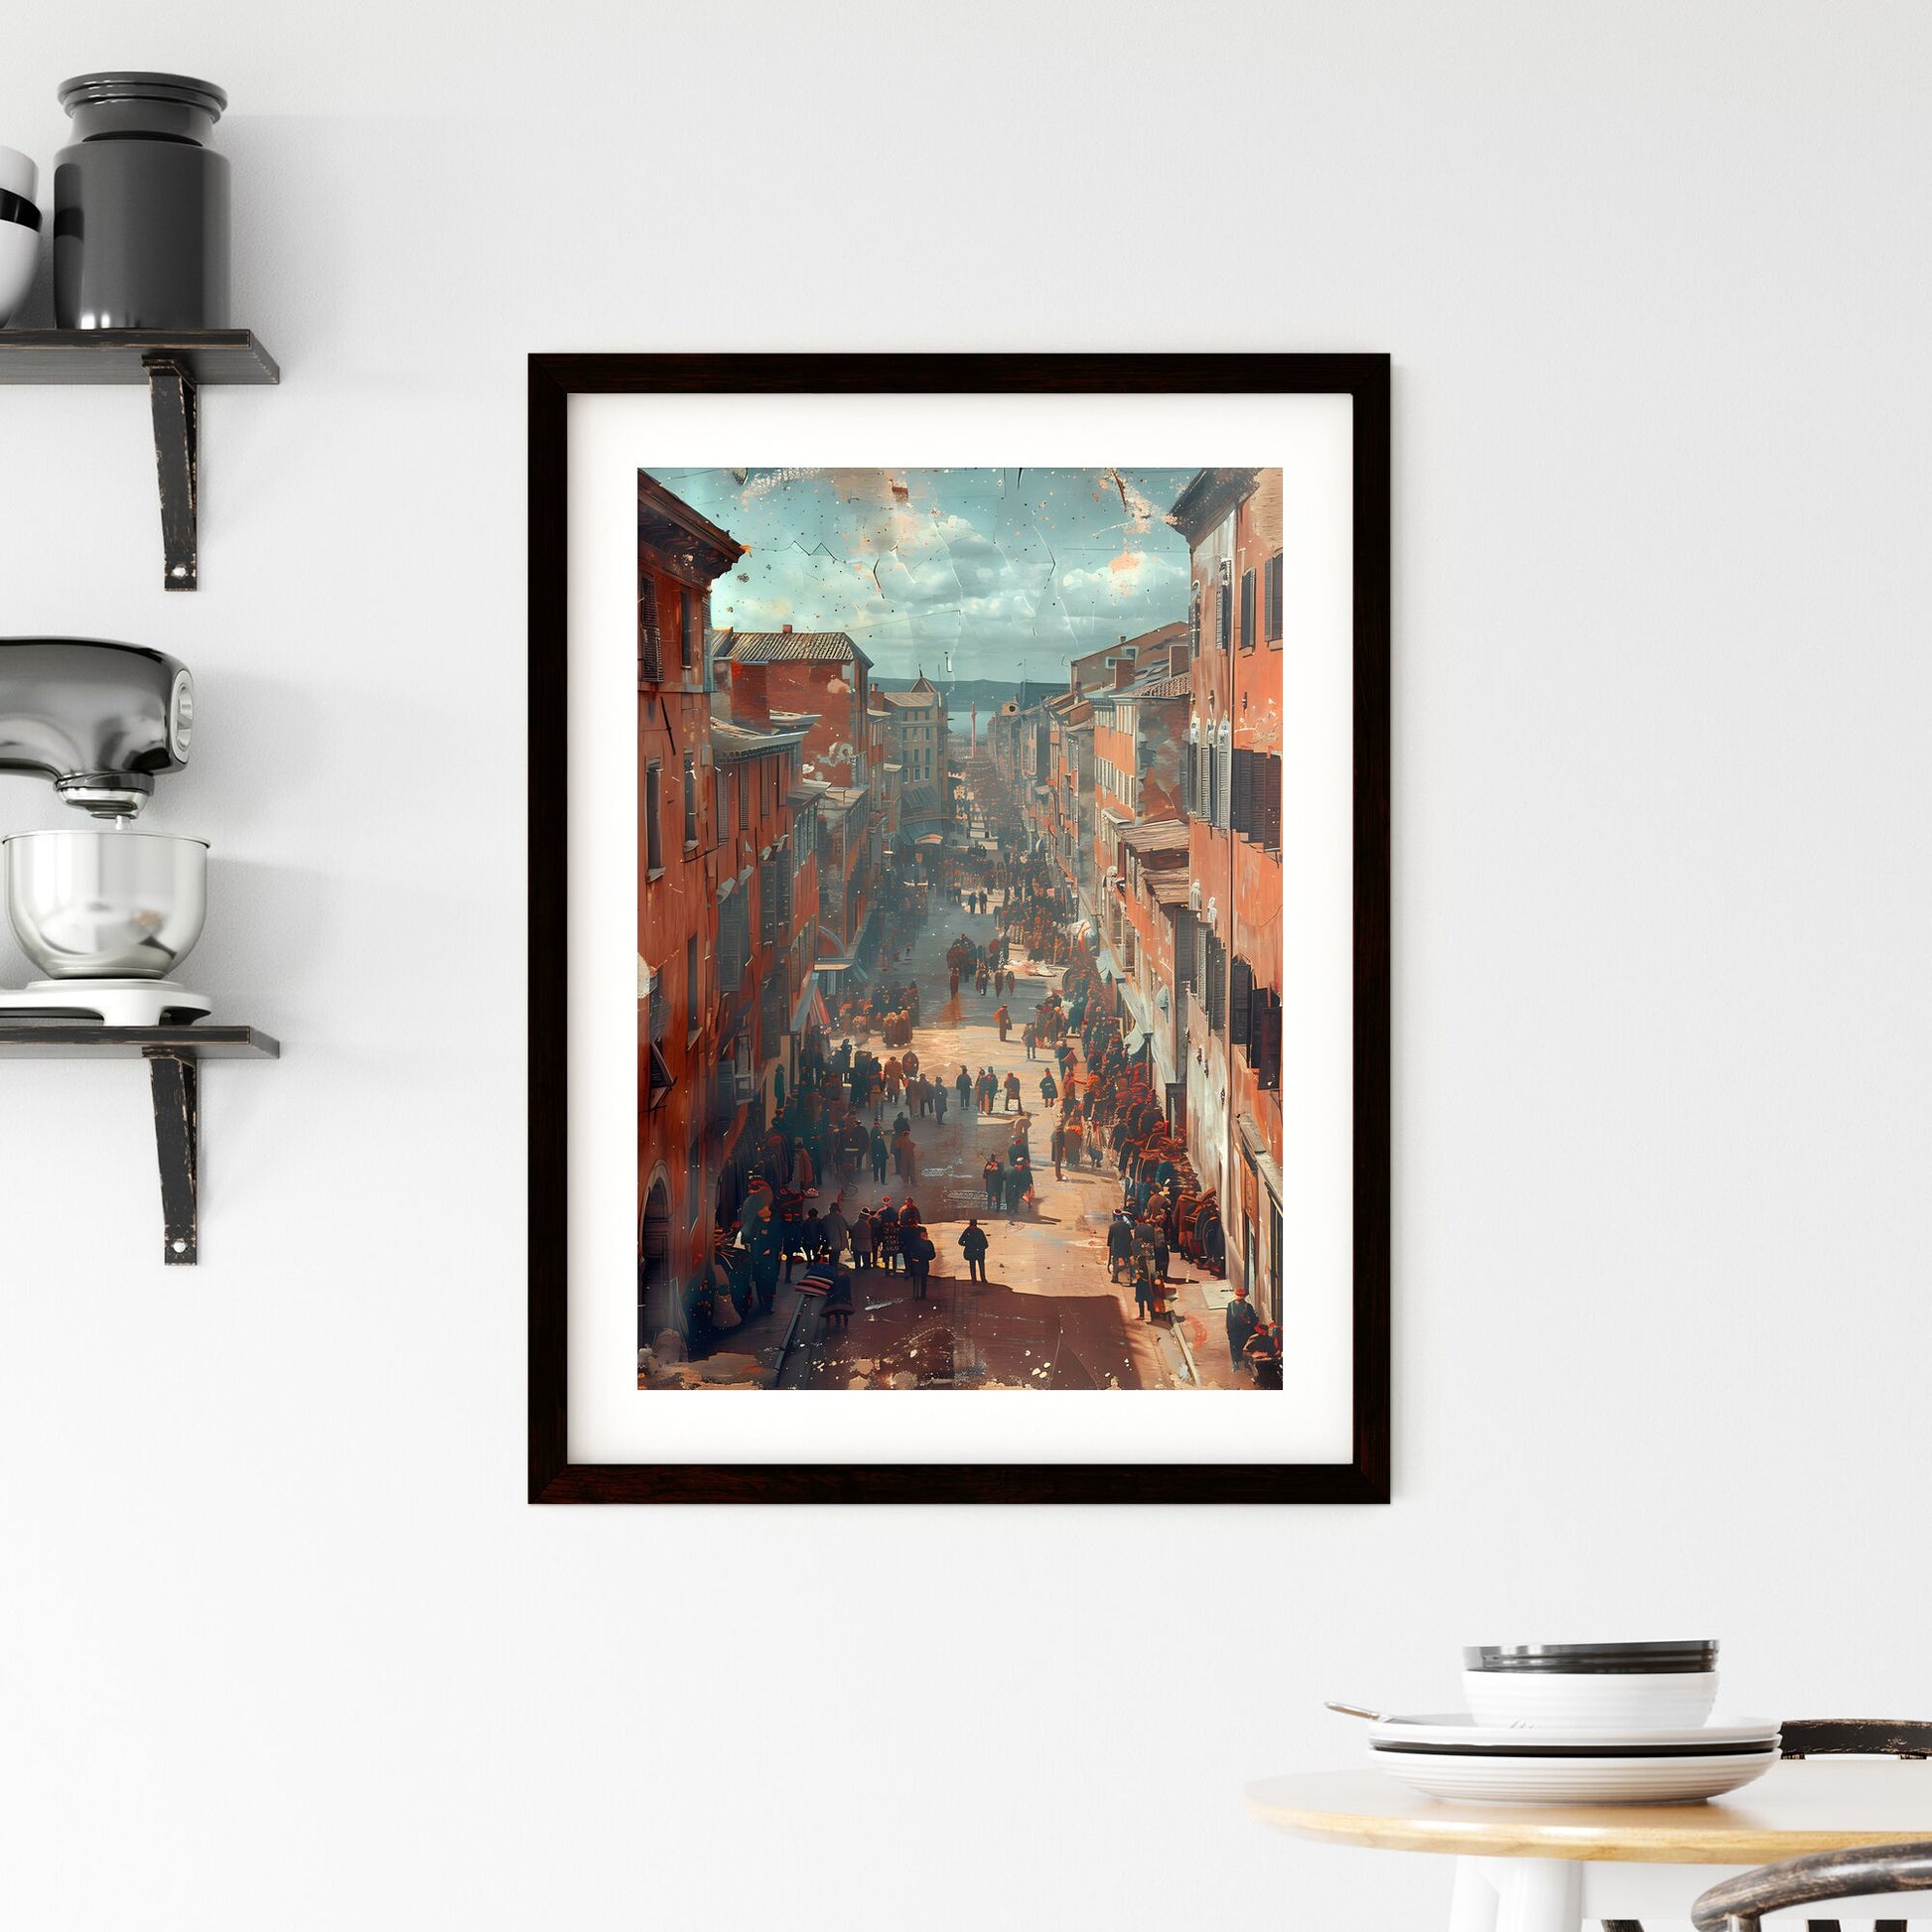 Artistic Street Scene Painting: Bustling Cityscape with Figures, Market Vibes, Modern Art Default Title